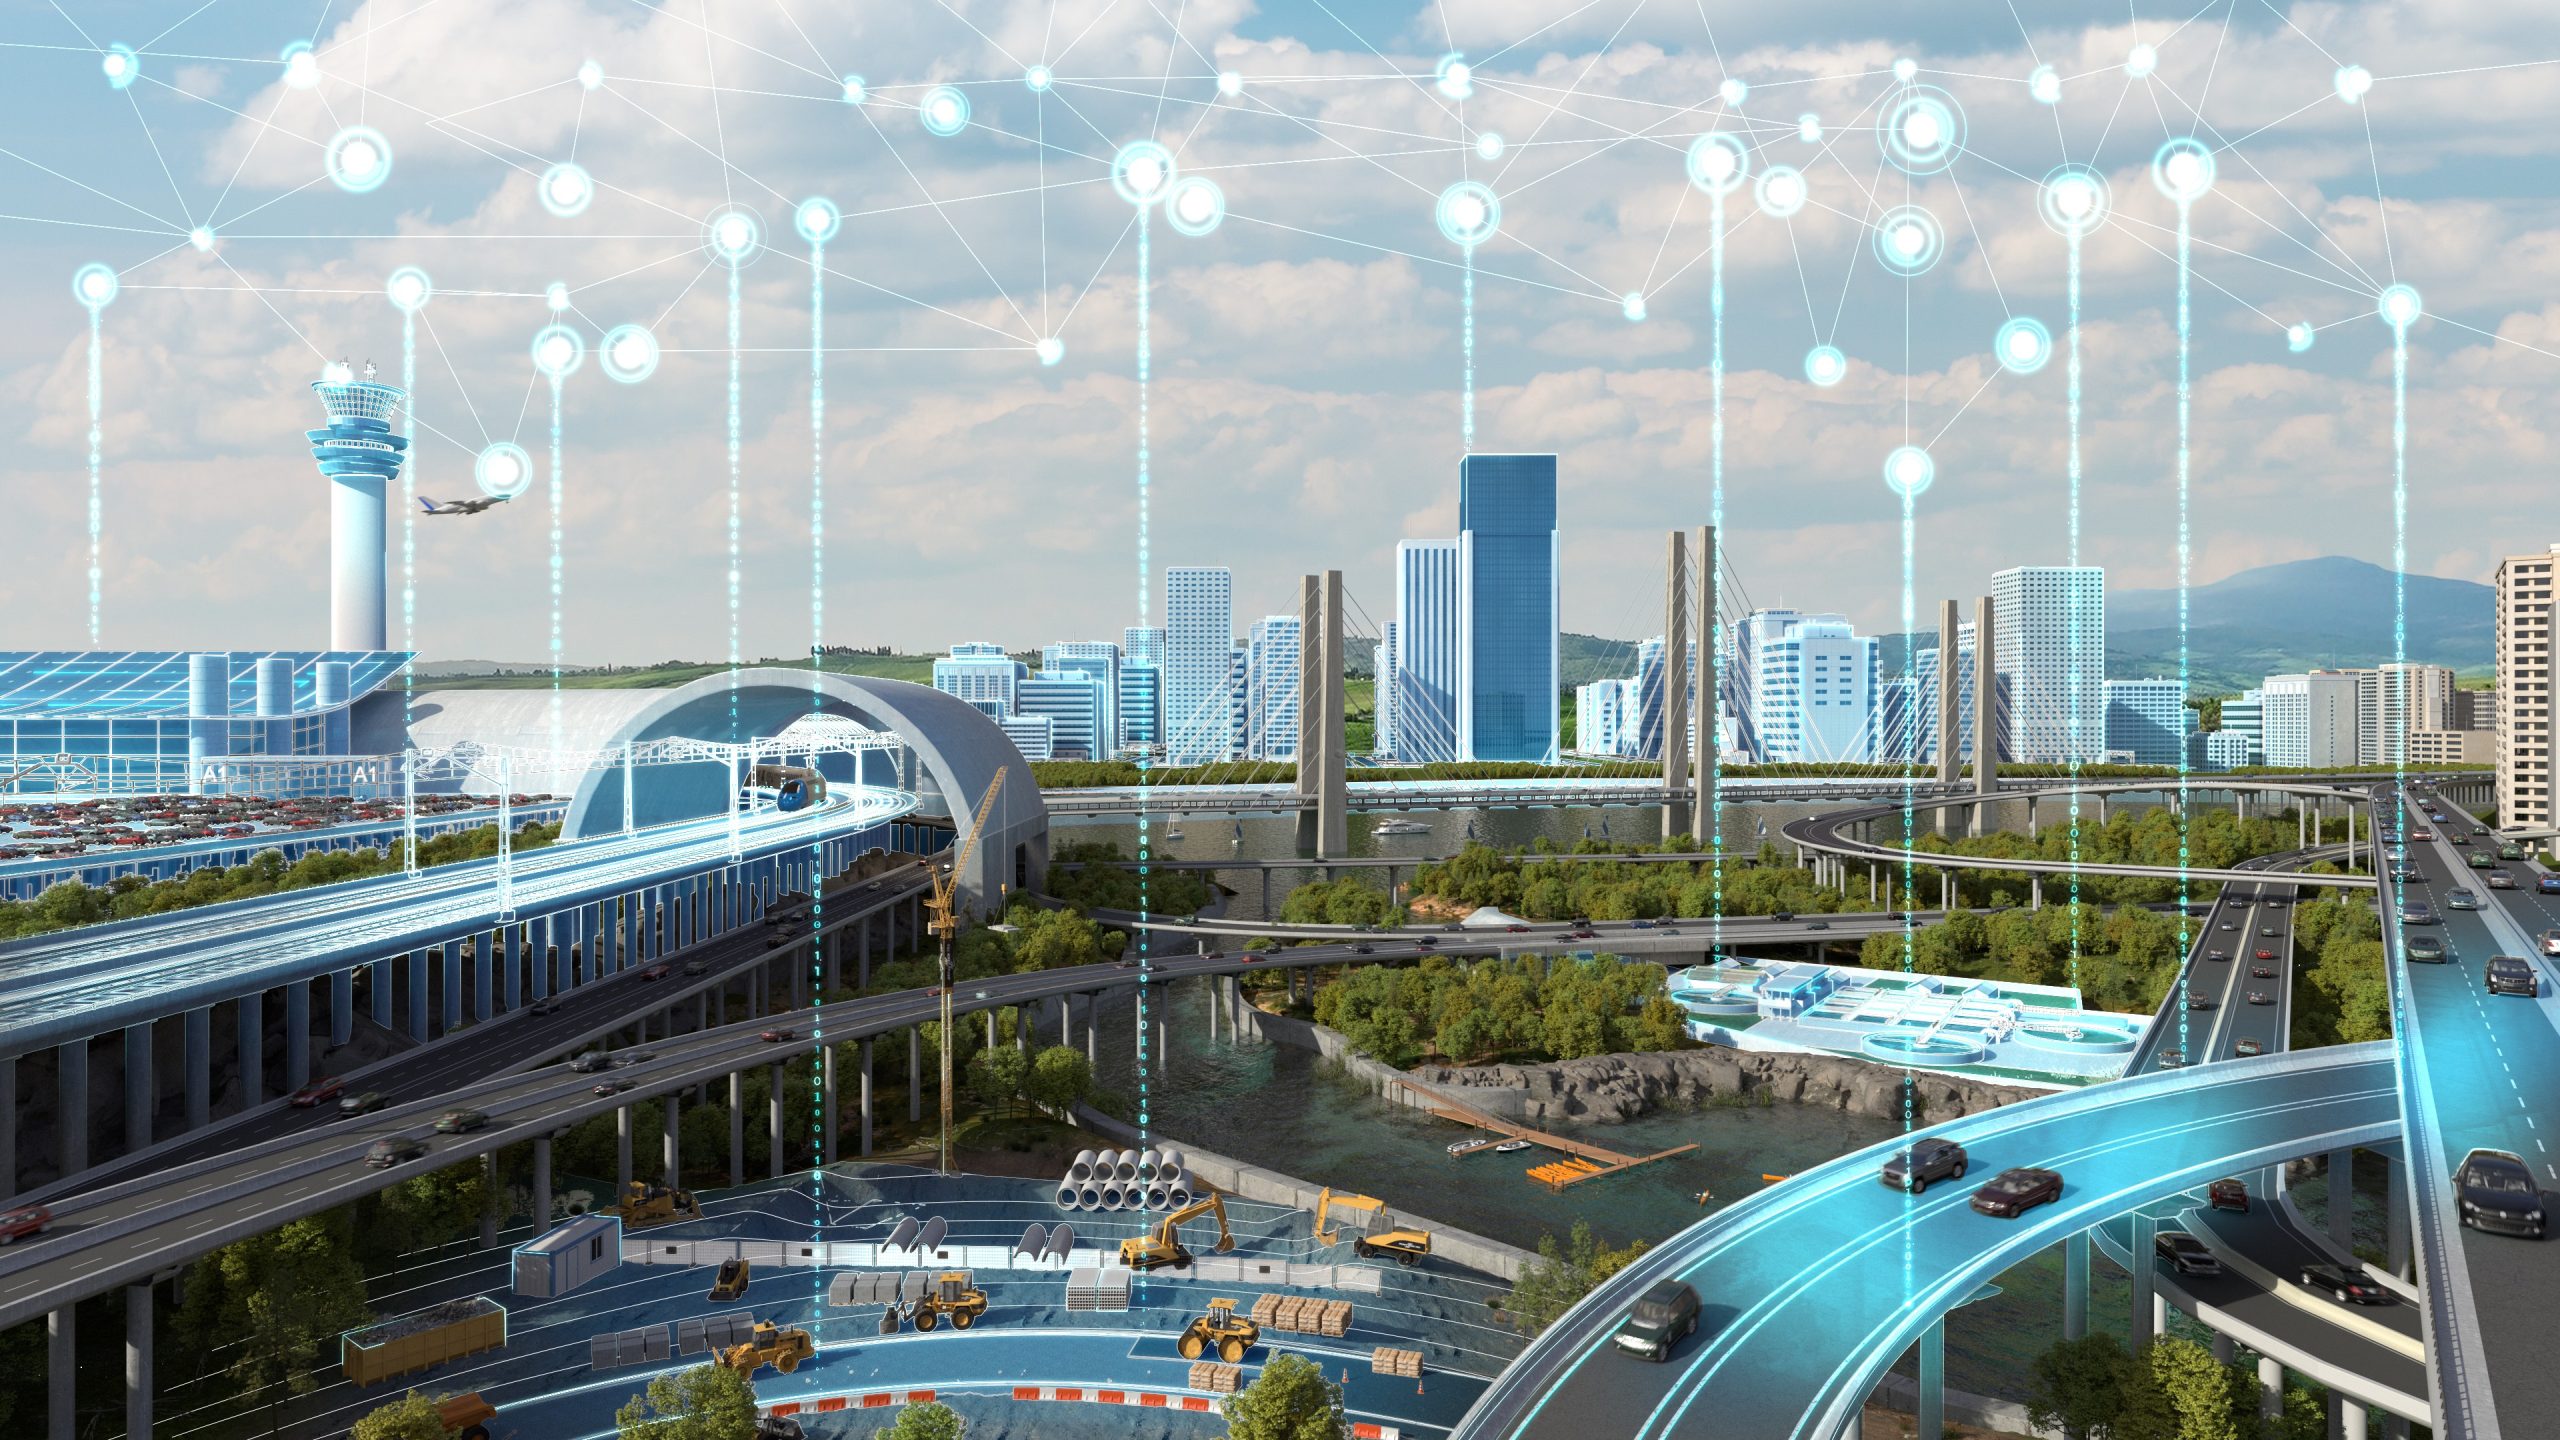 Collaboration paves the way for digital transformation of transportation